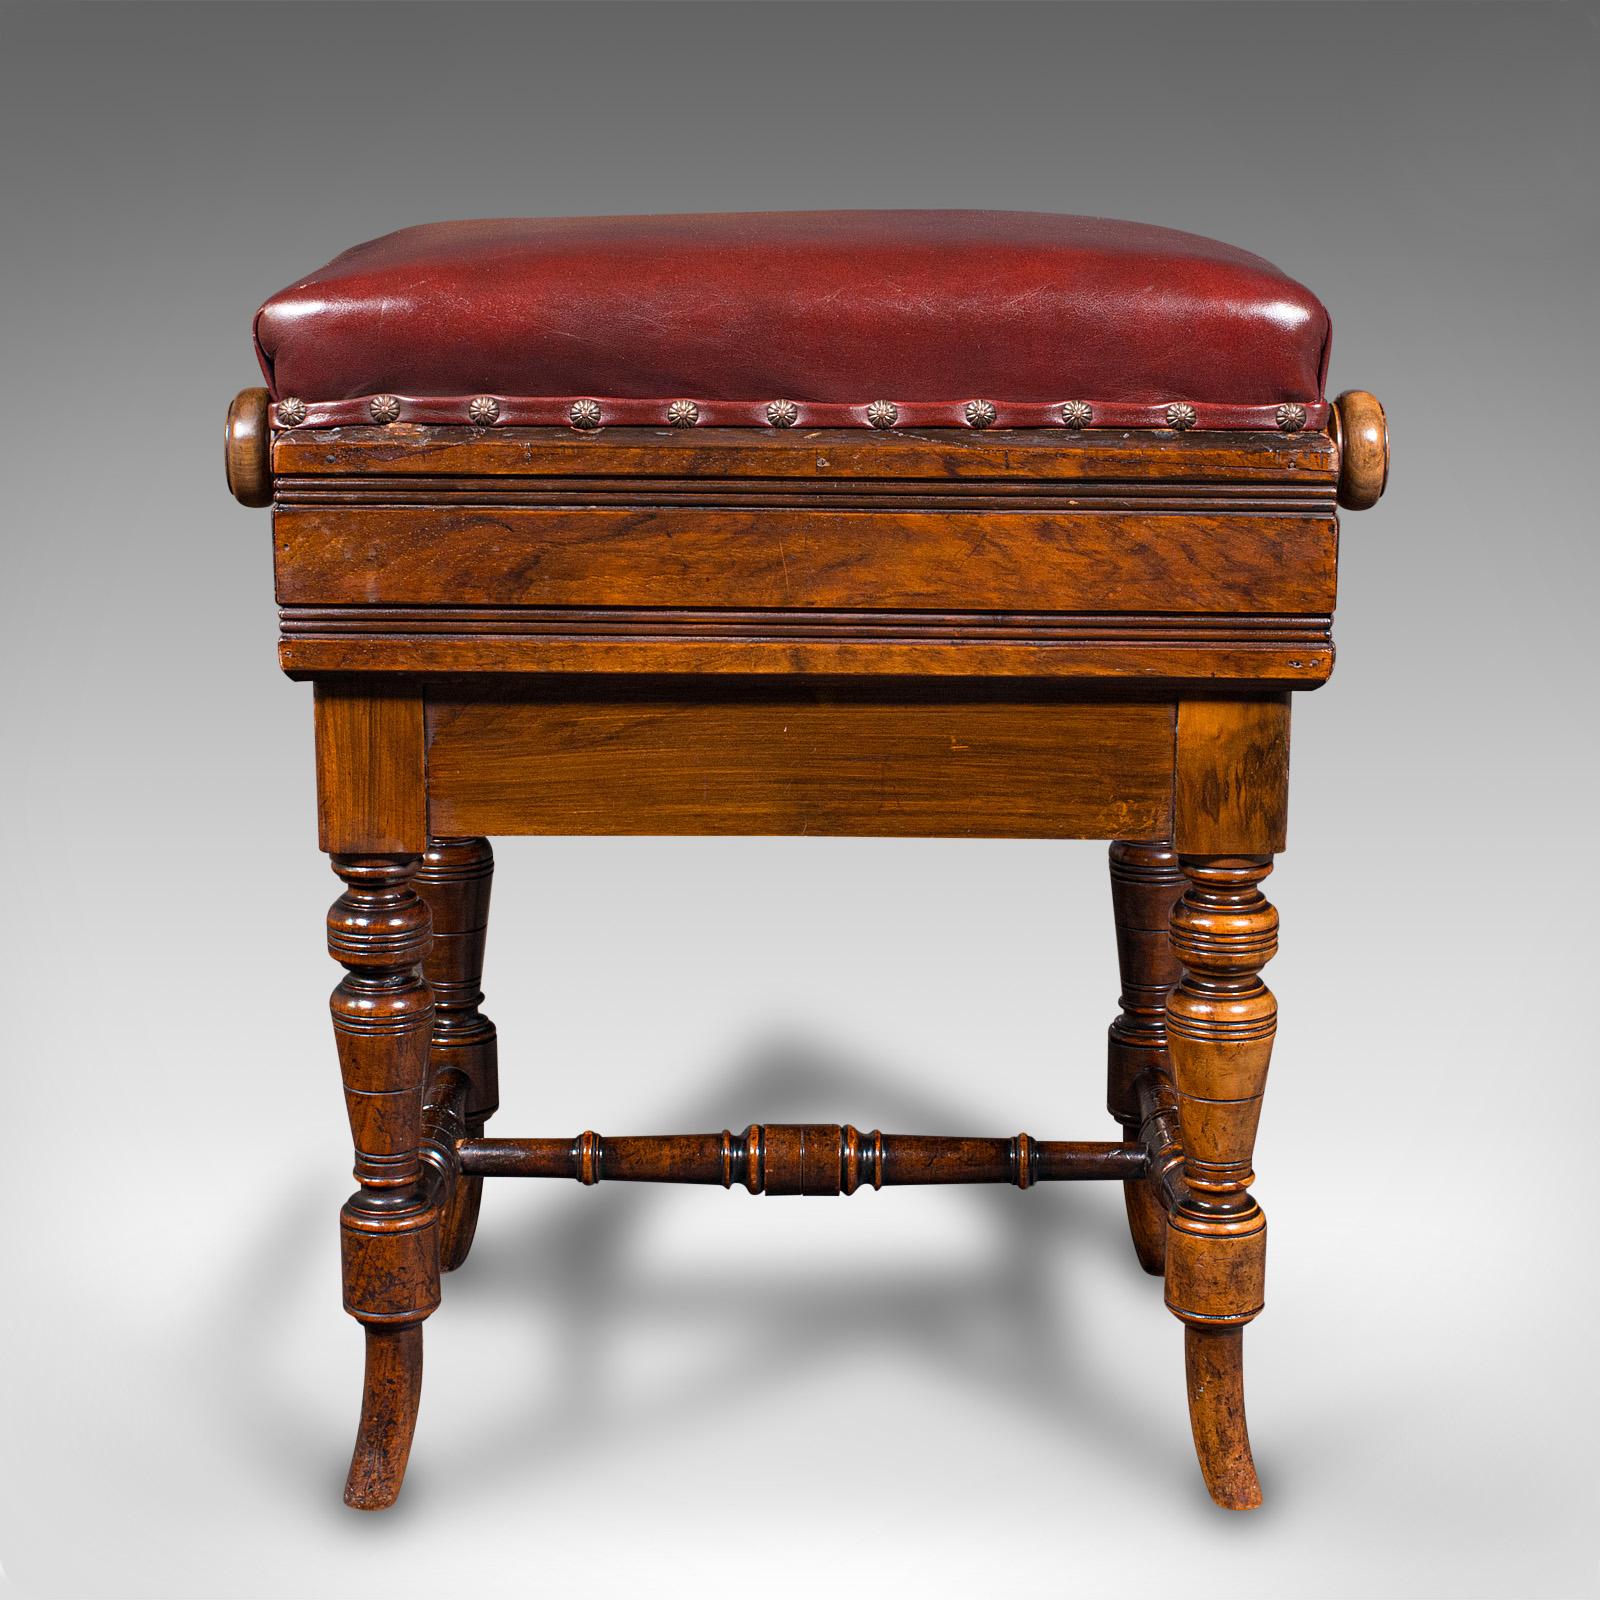 This is an antique piano stool. An English, walnut and leather adjustable music or recital riser by Brooks Limited, dating to the Victorian period, circa 1880.

Of superb craftsmanship and Victorian appeal
Displays a desirable aged patina and in